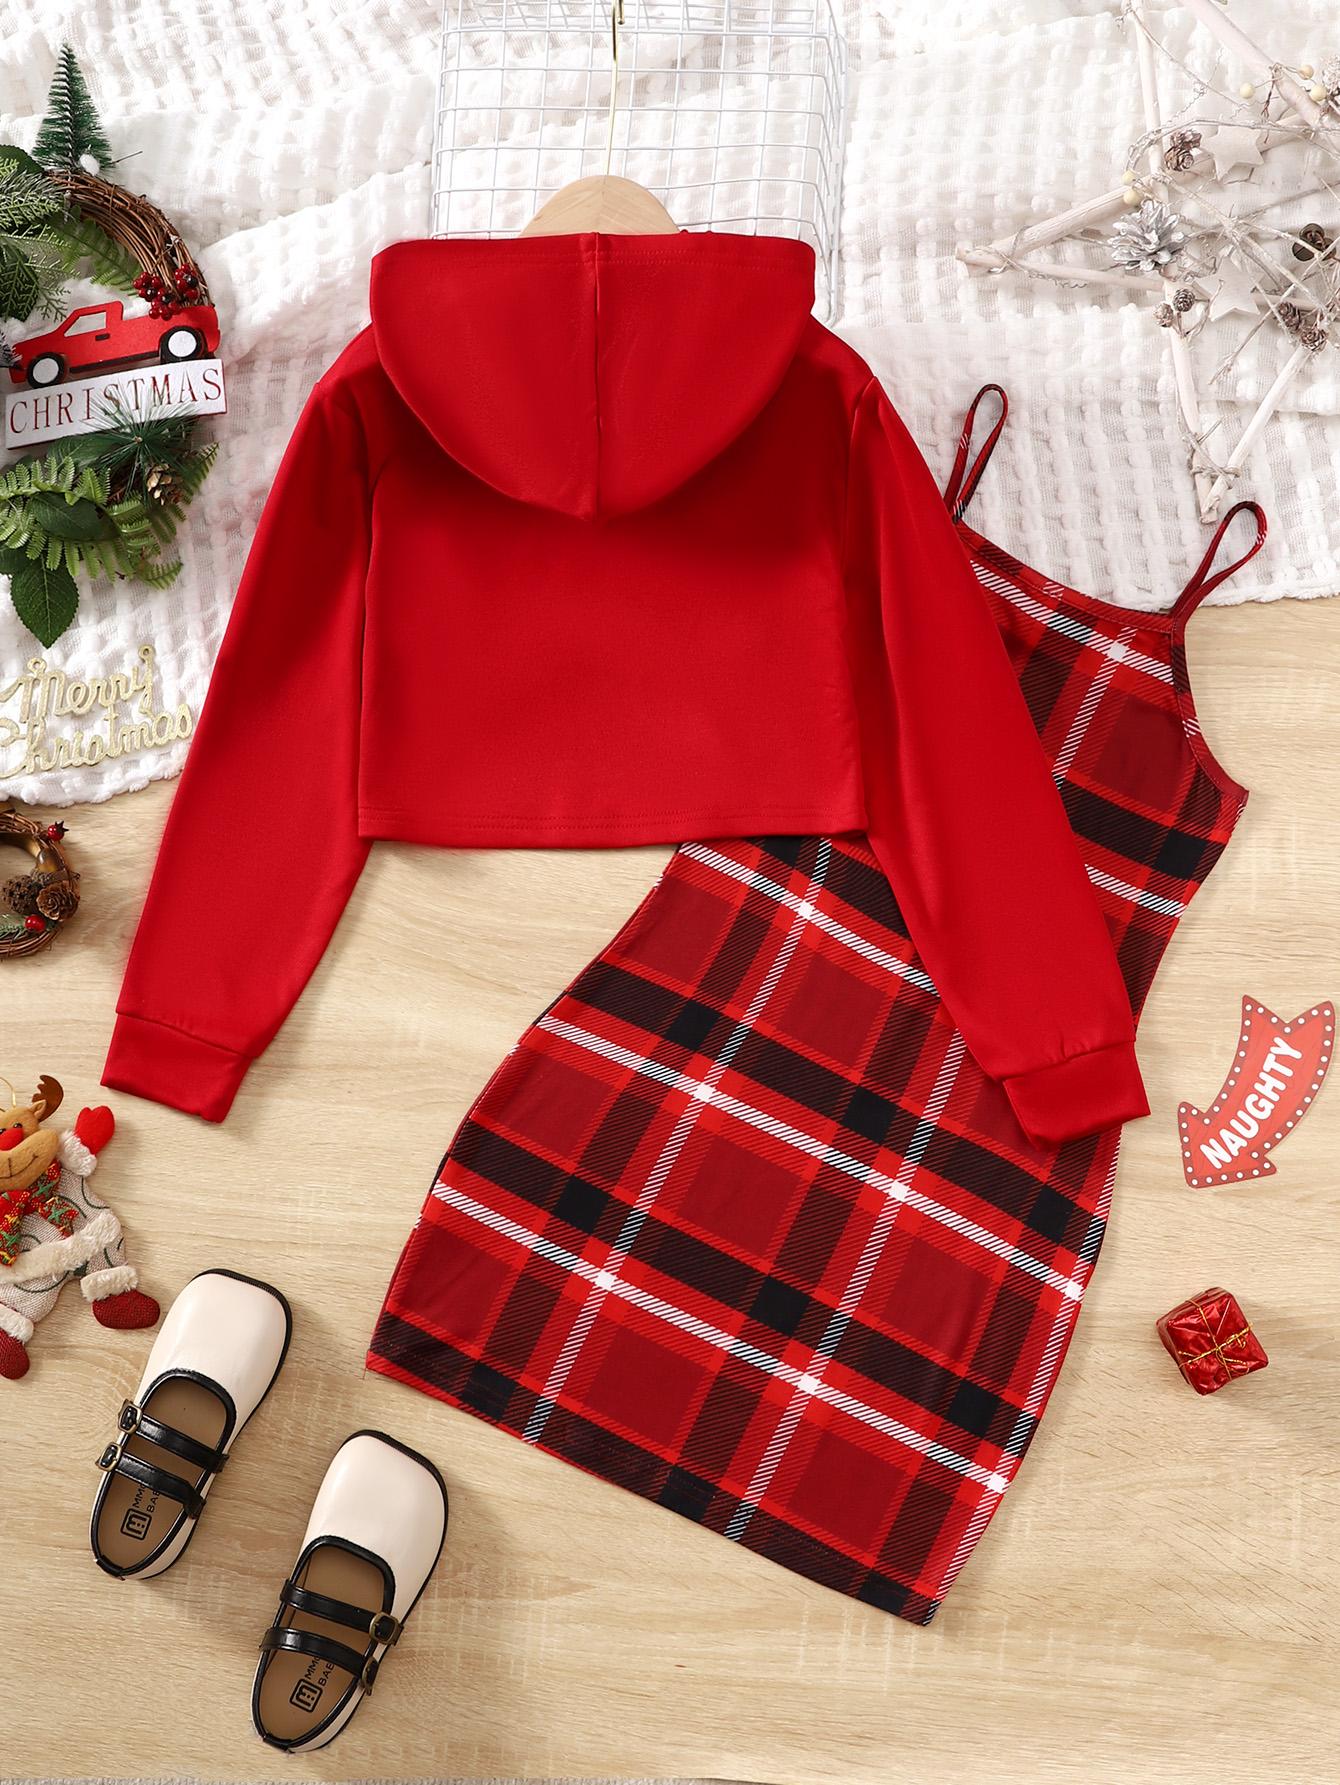 8-14Y  Kids Girls Christmas Outfits Straps Plaid Print Dress Long Sleeve Sweater Hoodies 2Pcs Nice Apparel Clothes Set Red Catpapa 462307023